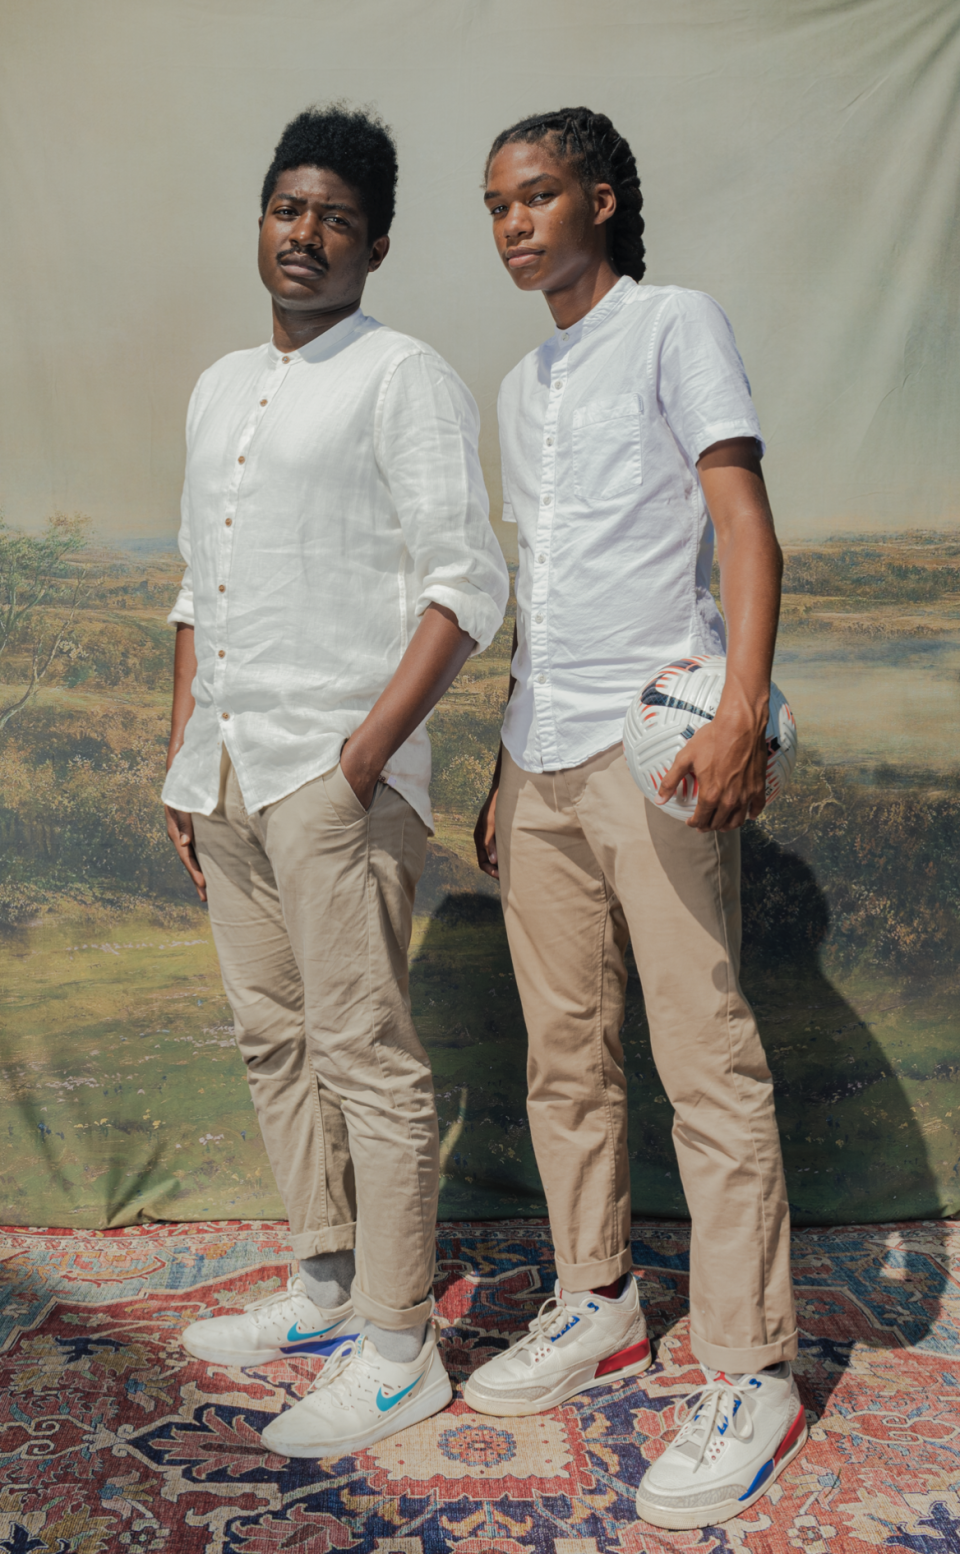 The Martha’s Vineyard Museum has opened a new exhibit that is named “Grow, As We Are” and features large-scale photo portraits documenting the Island's Black community.